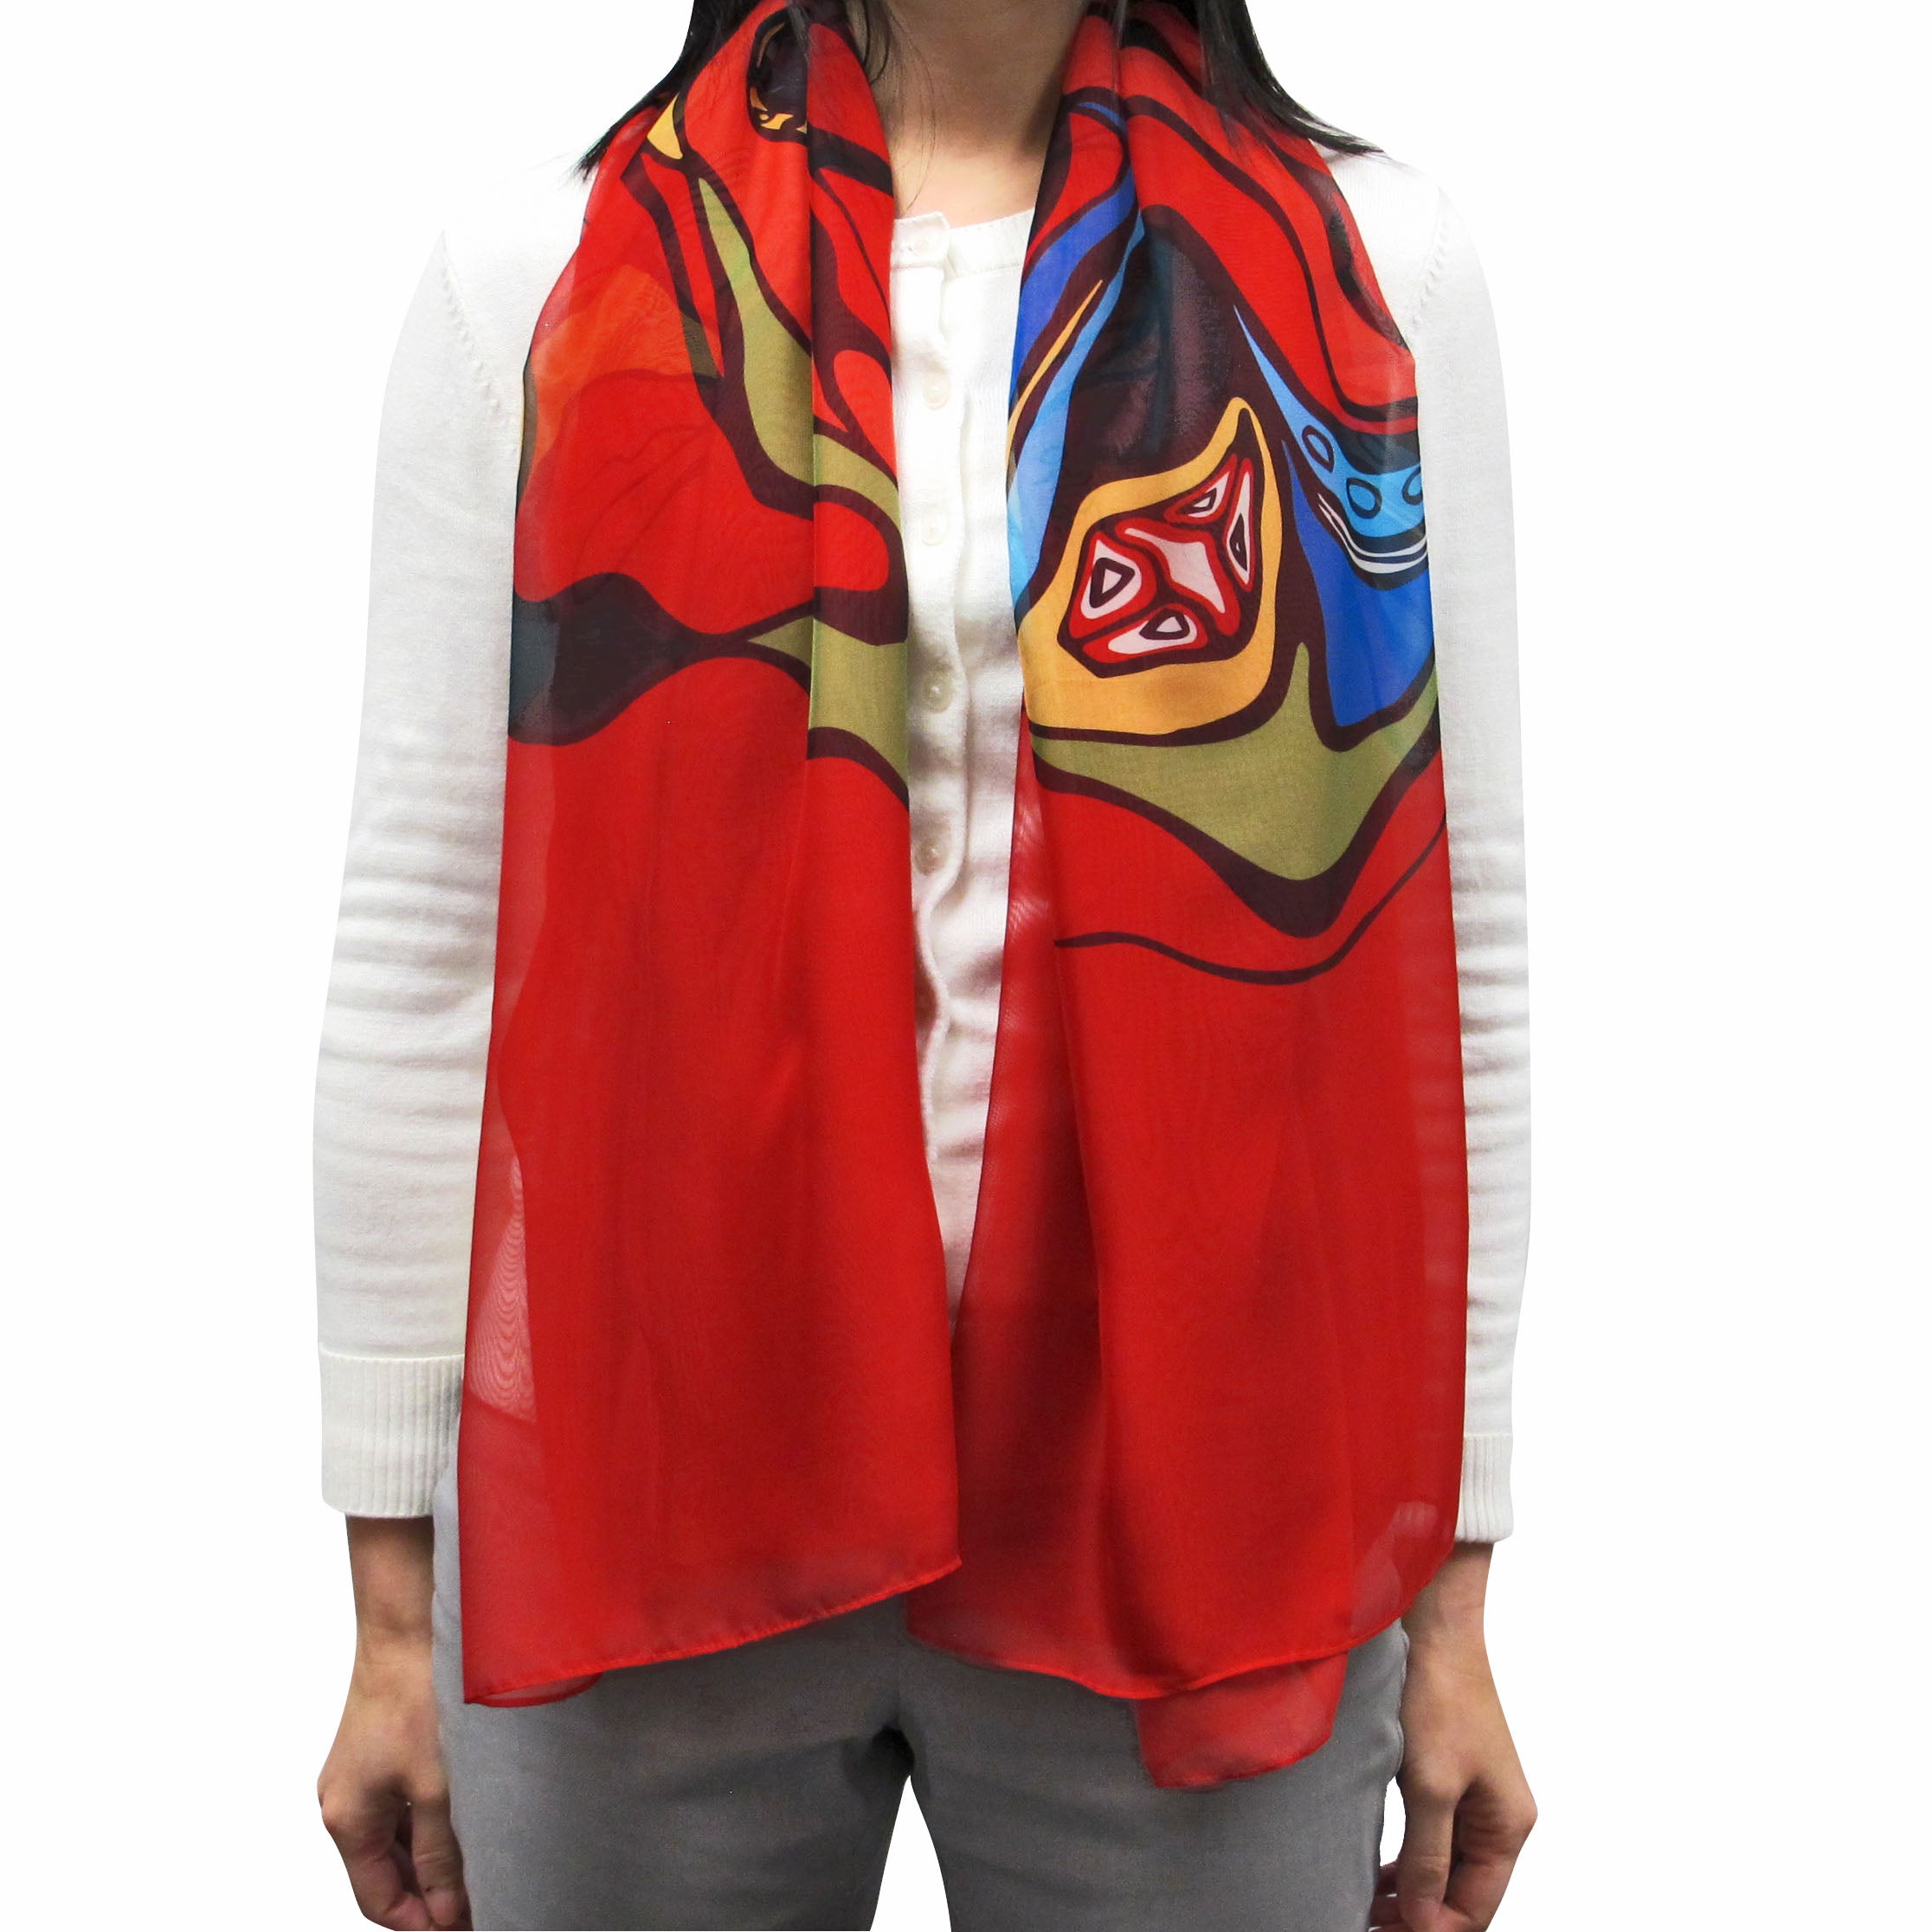 Daphne Odjig Pow Wow Dancer Cape Scarf - Out of Stock